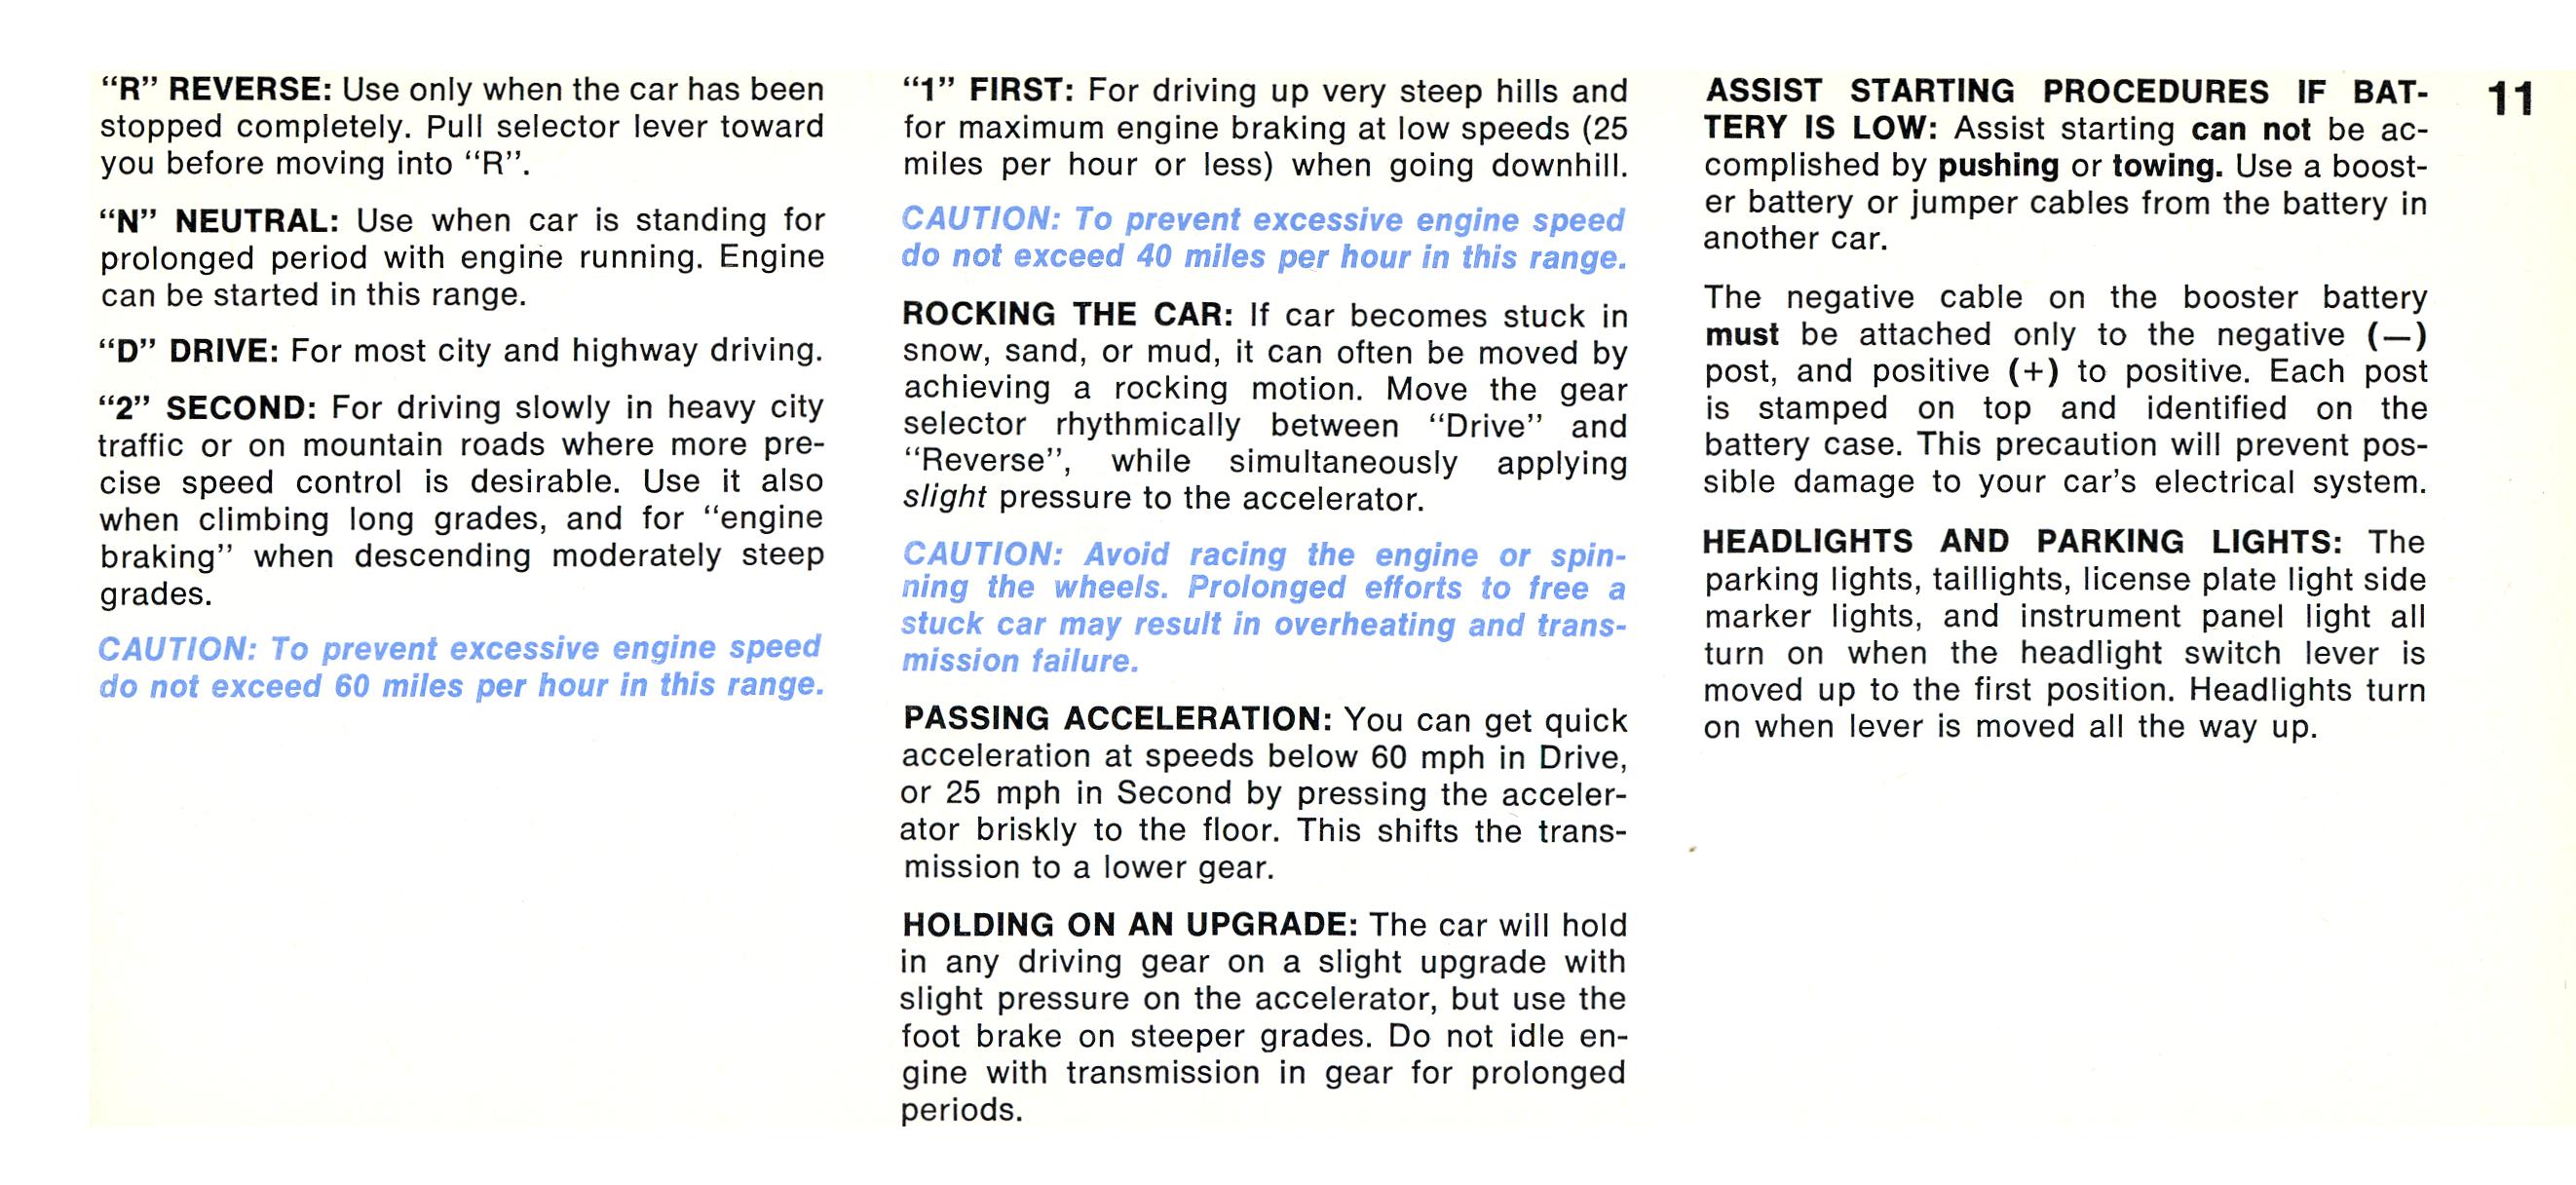 1968 Chrysler Imperial Owners Manual Page 17